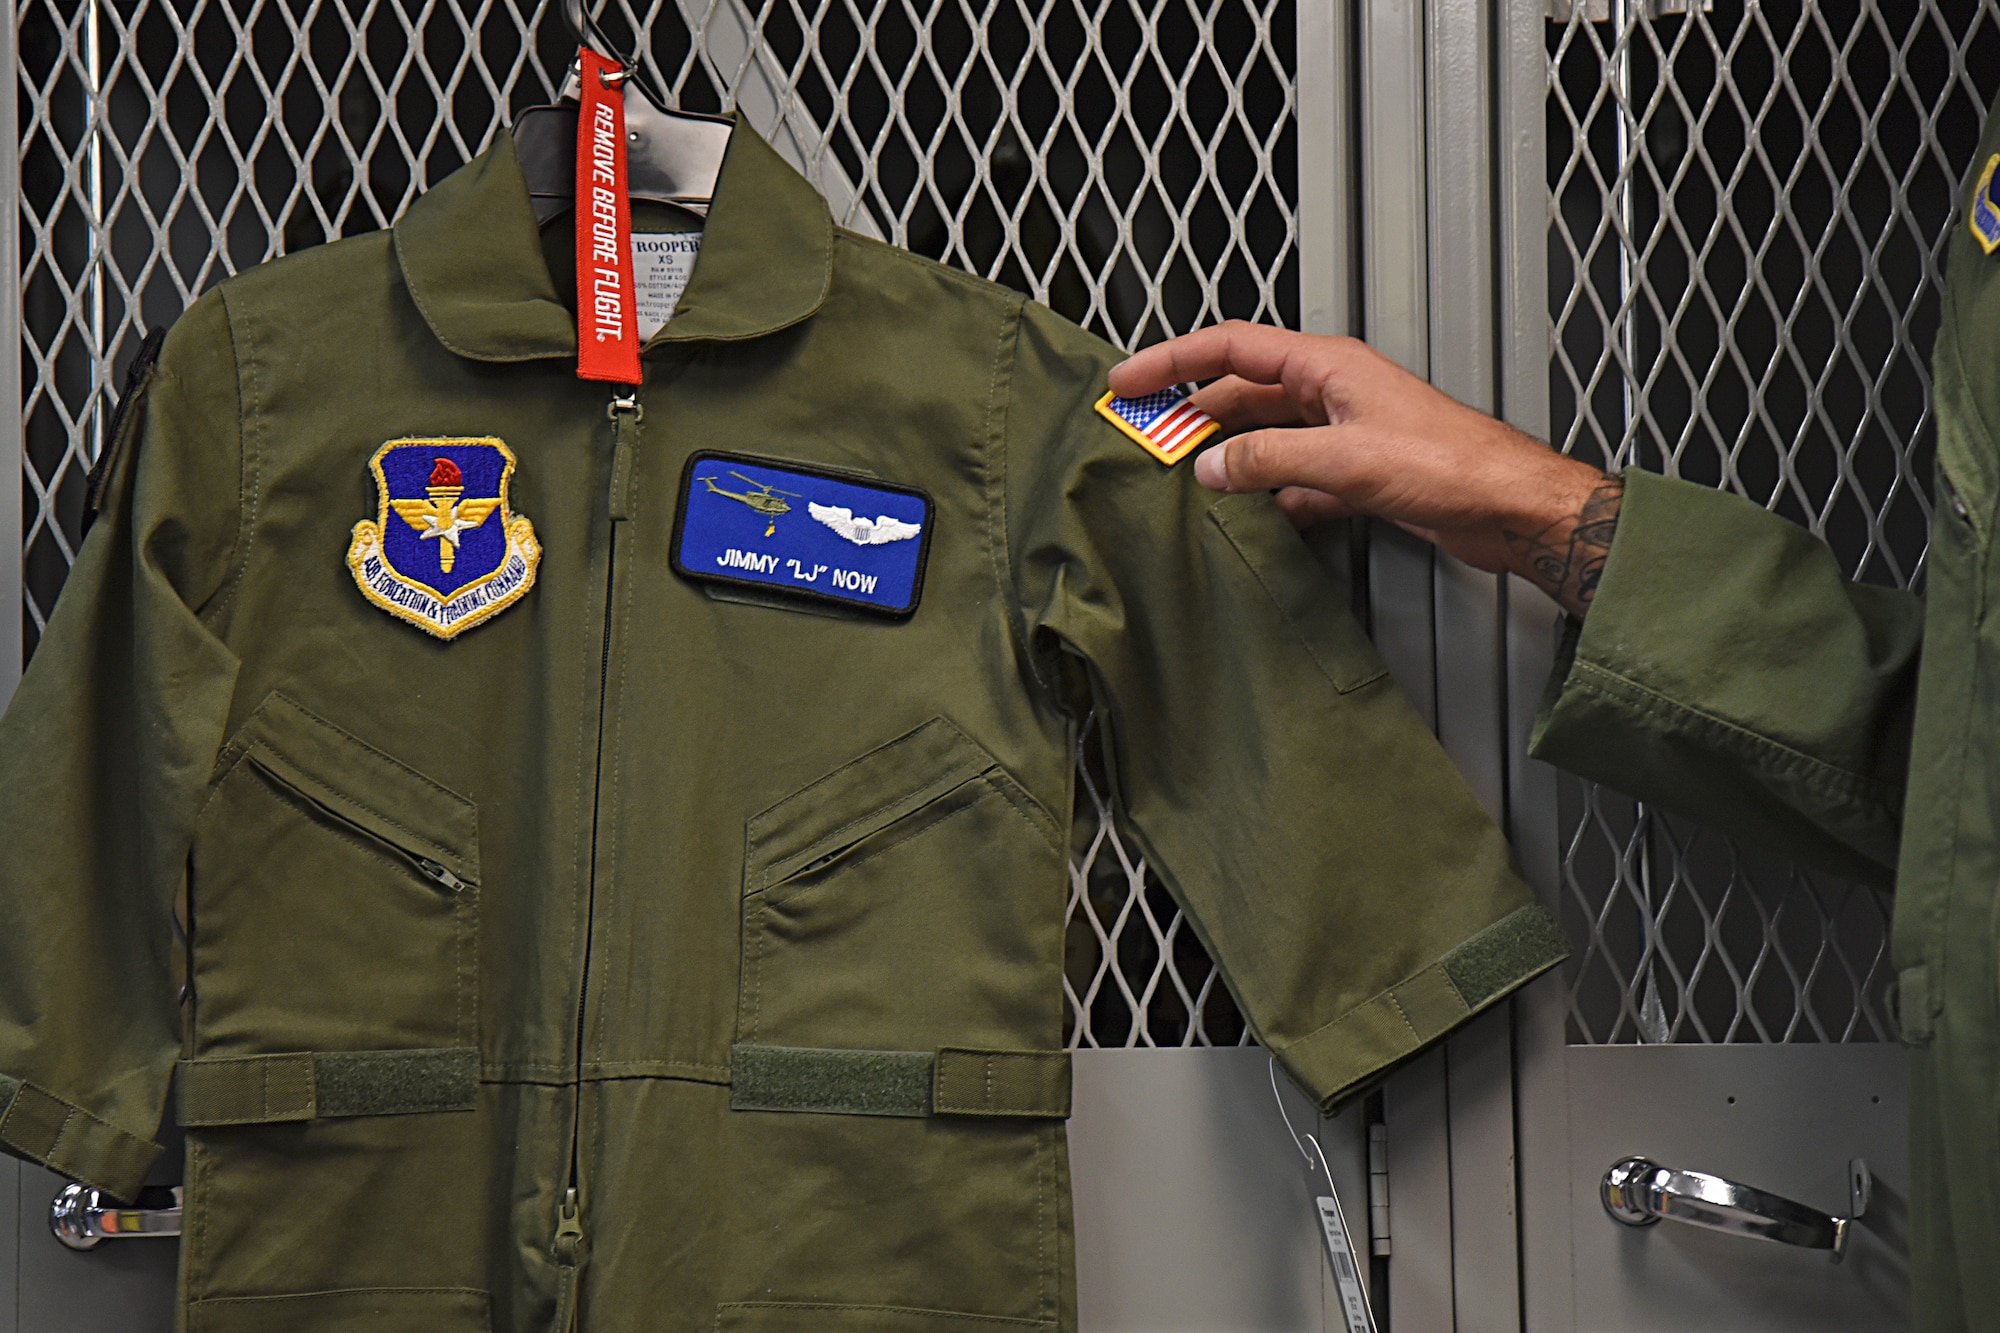 Capt. Kyle Nelson, 36th Rescue Squadron standardization and evaluation chief, presents Jimmy "LJ" Now his own flight suit during the Now family's visit Sept. 7, 2018, at Fairchild Air Force Base, Washington. LJ also received a personalized helmet, plaque, helicopter joy stick and a homemade memory box to commemorate his time as a Honorary UH-1N Huey pilot. (U.S. Air Force photo/Staff Sgt. Mackenzie Mendez)